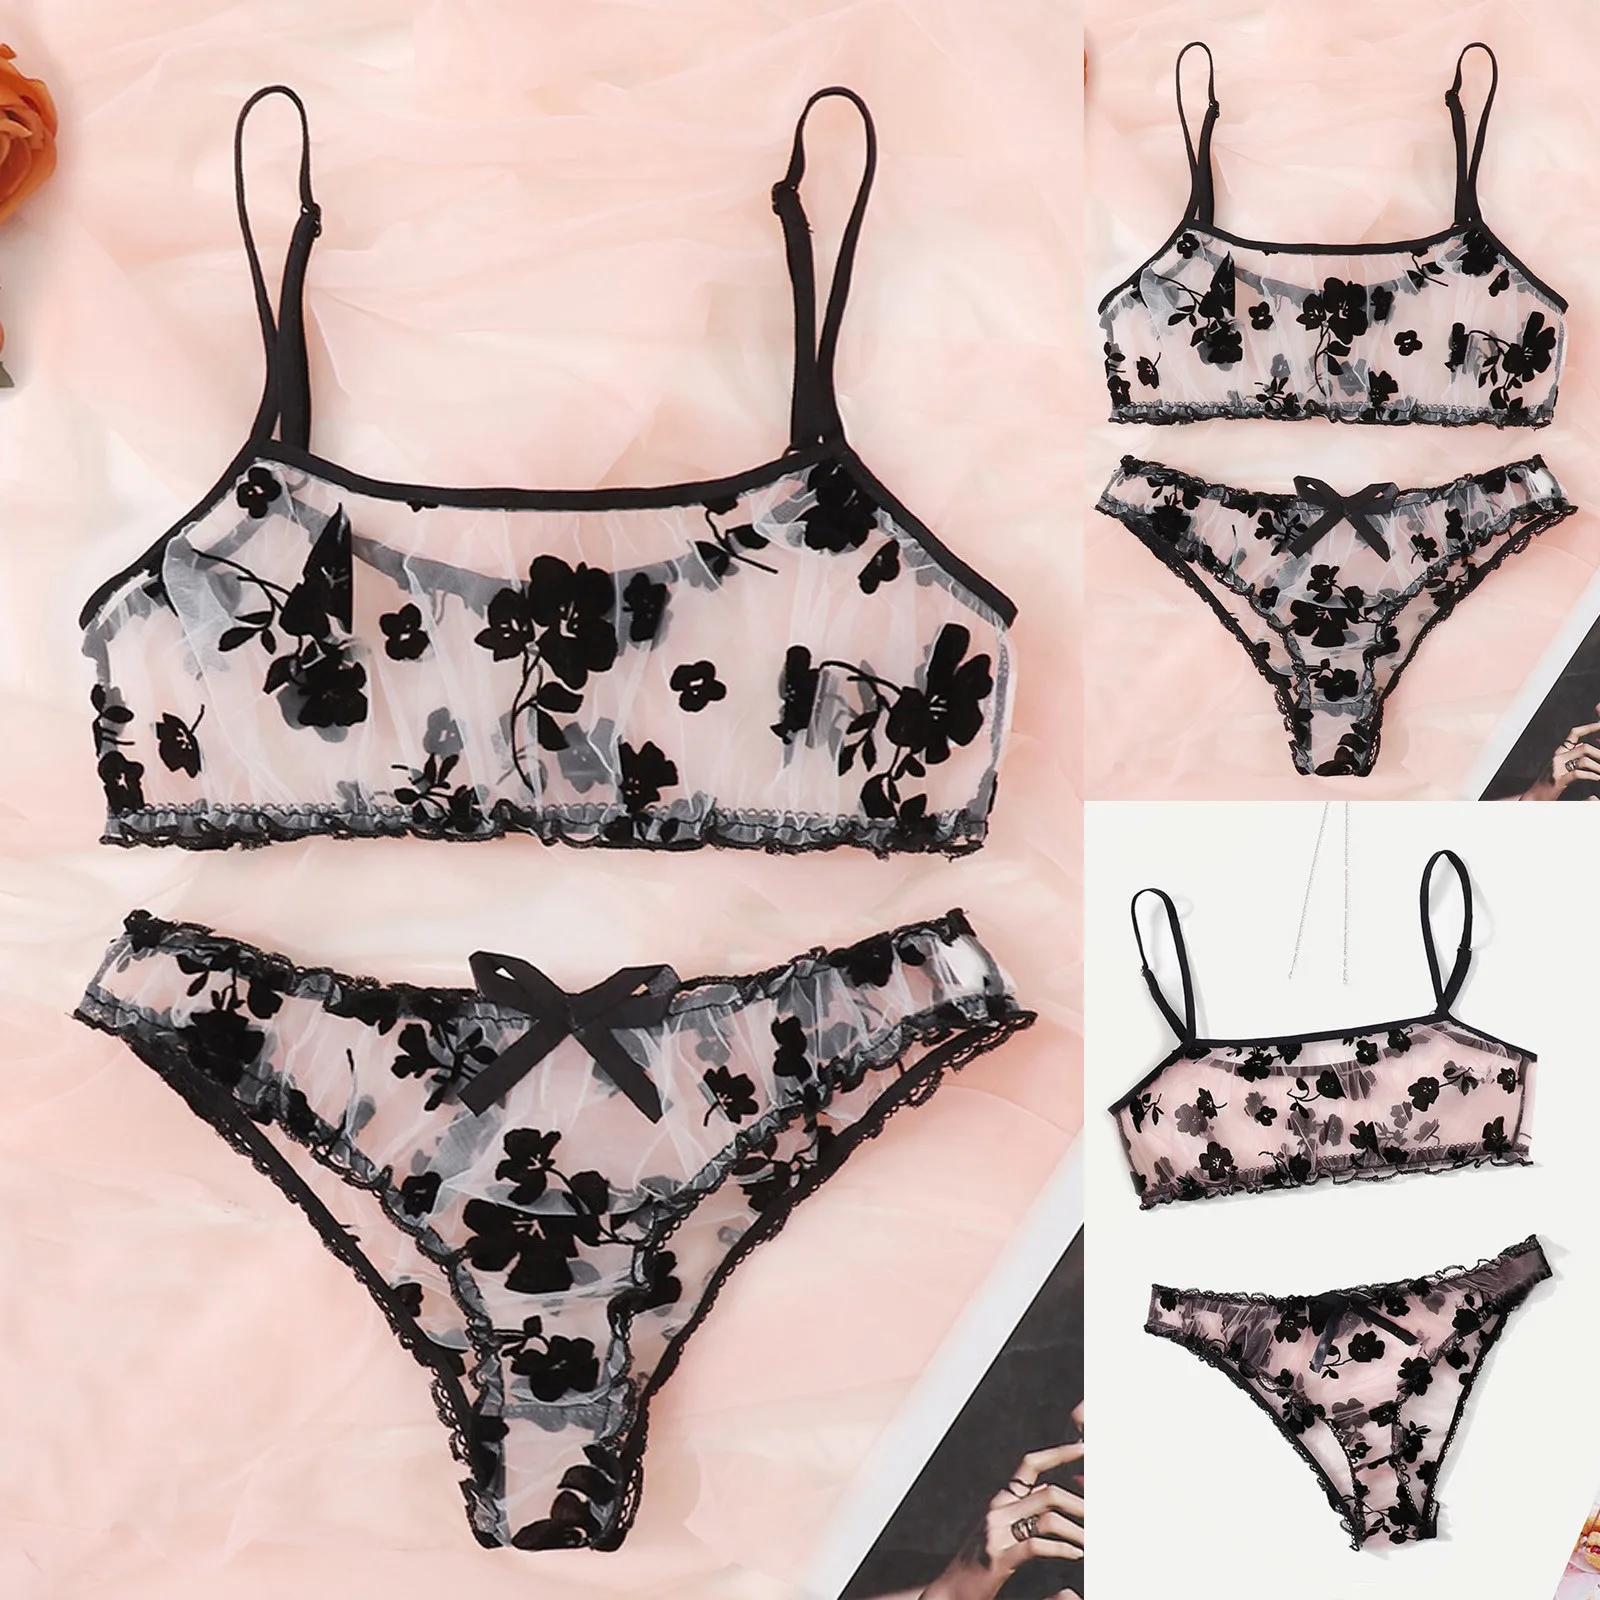 bralette sets 25# Erotic Sexy Lingerie Sets Women Sensual Underwear Push Up Bra With Lace Transparent Seamless Intimate Flower Embroidery bra and panty